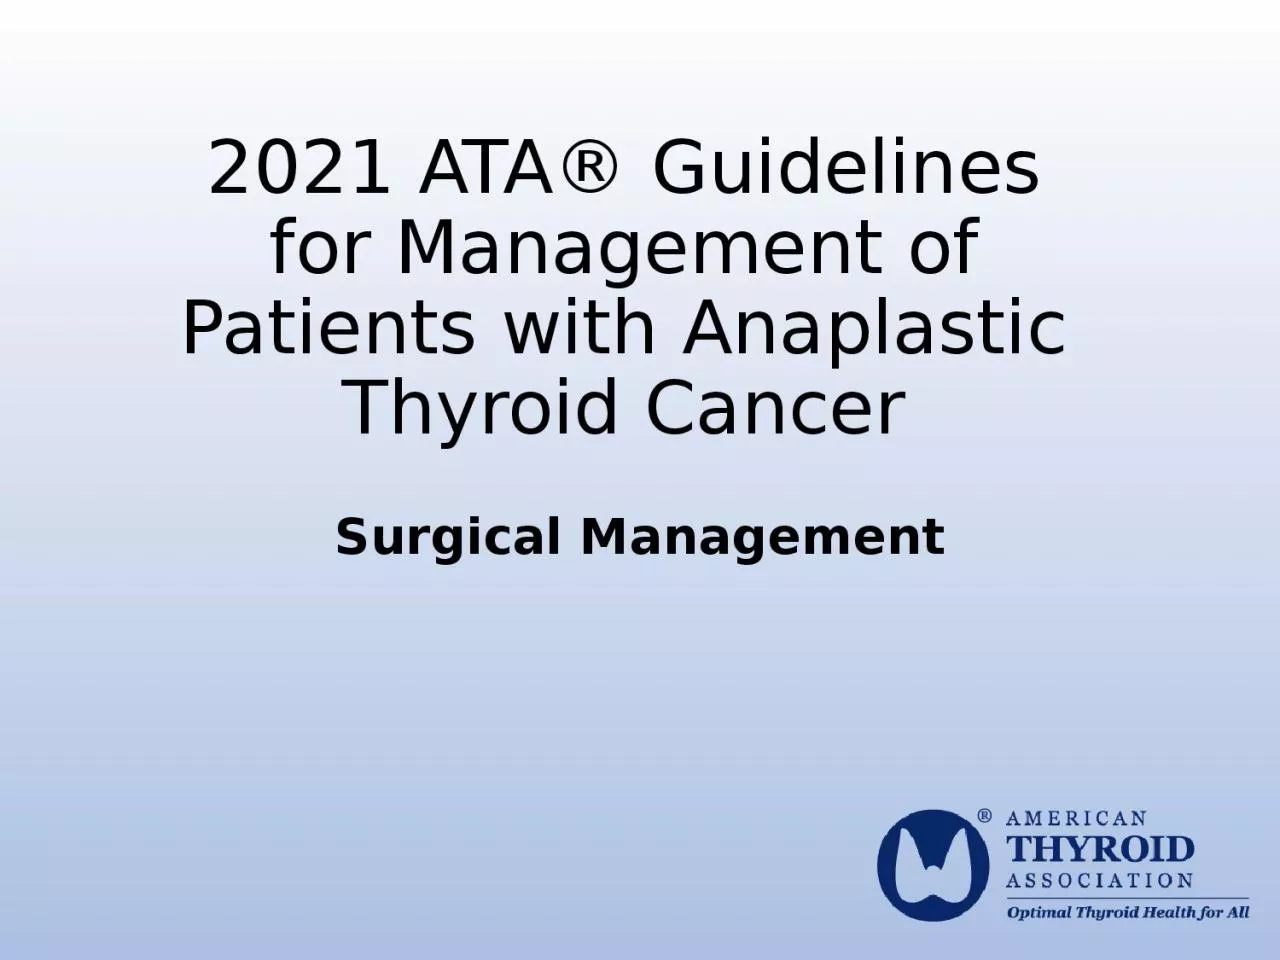 Surgical Management 2021 ATA® Guidelines for Management of Patients with Anaplastic